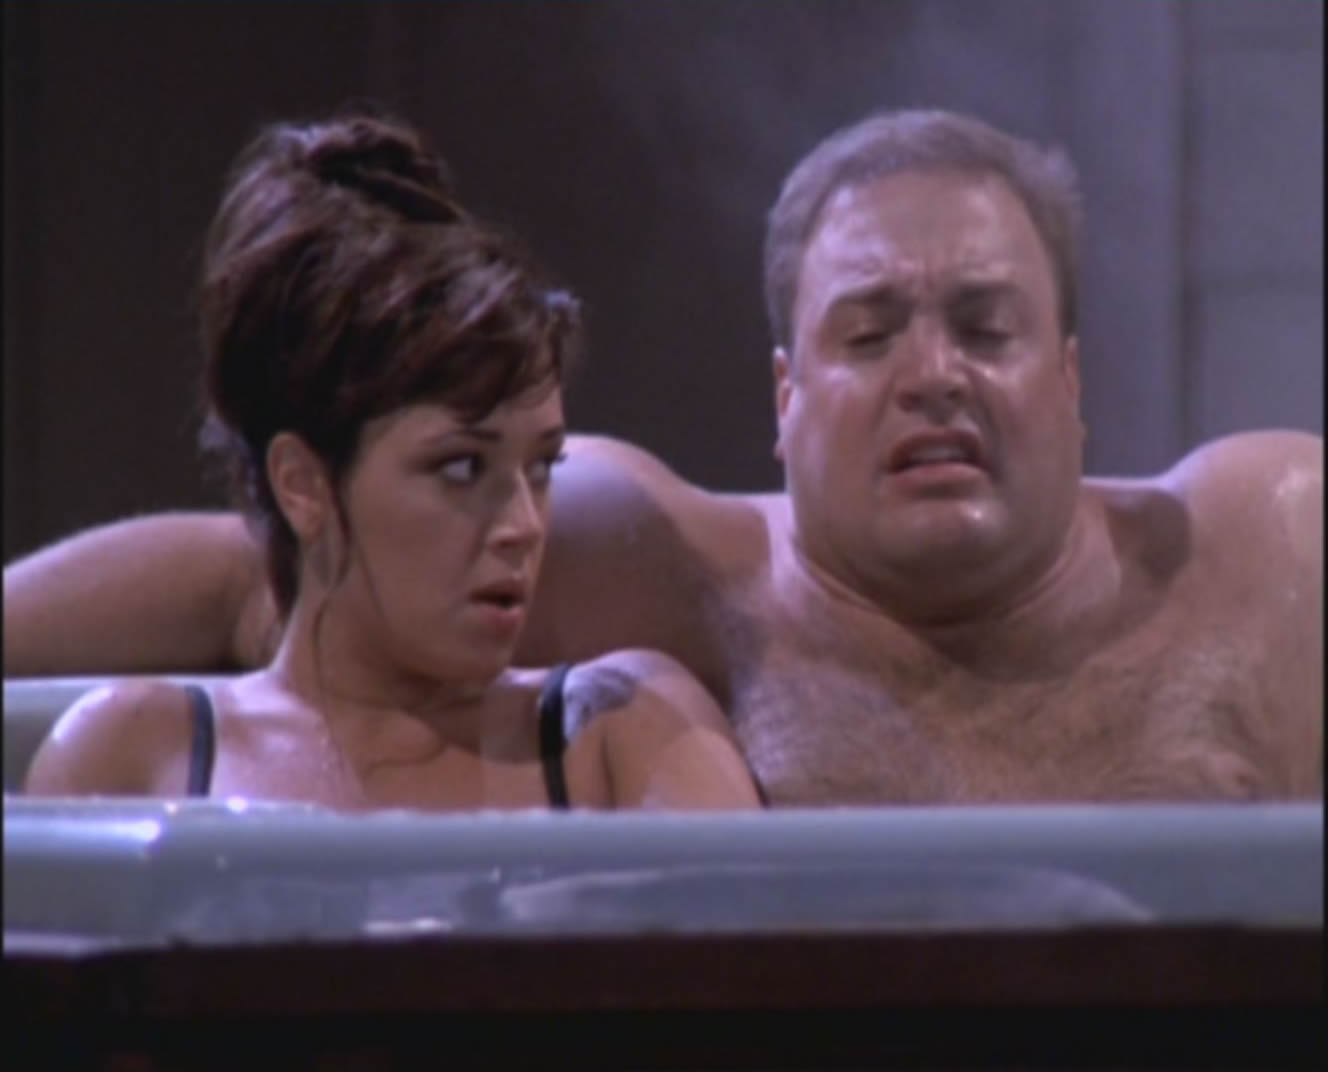 kevin james nude